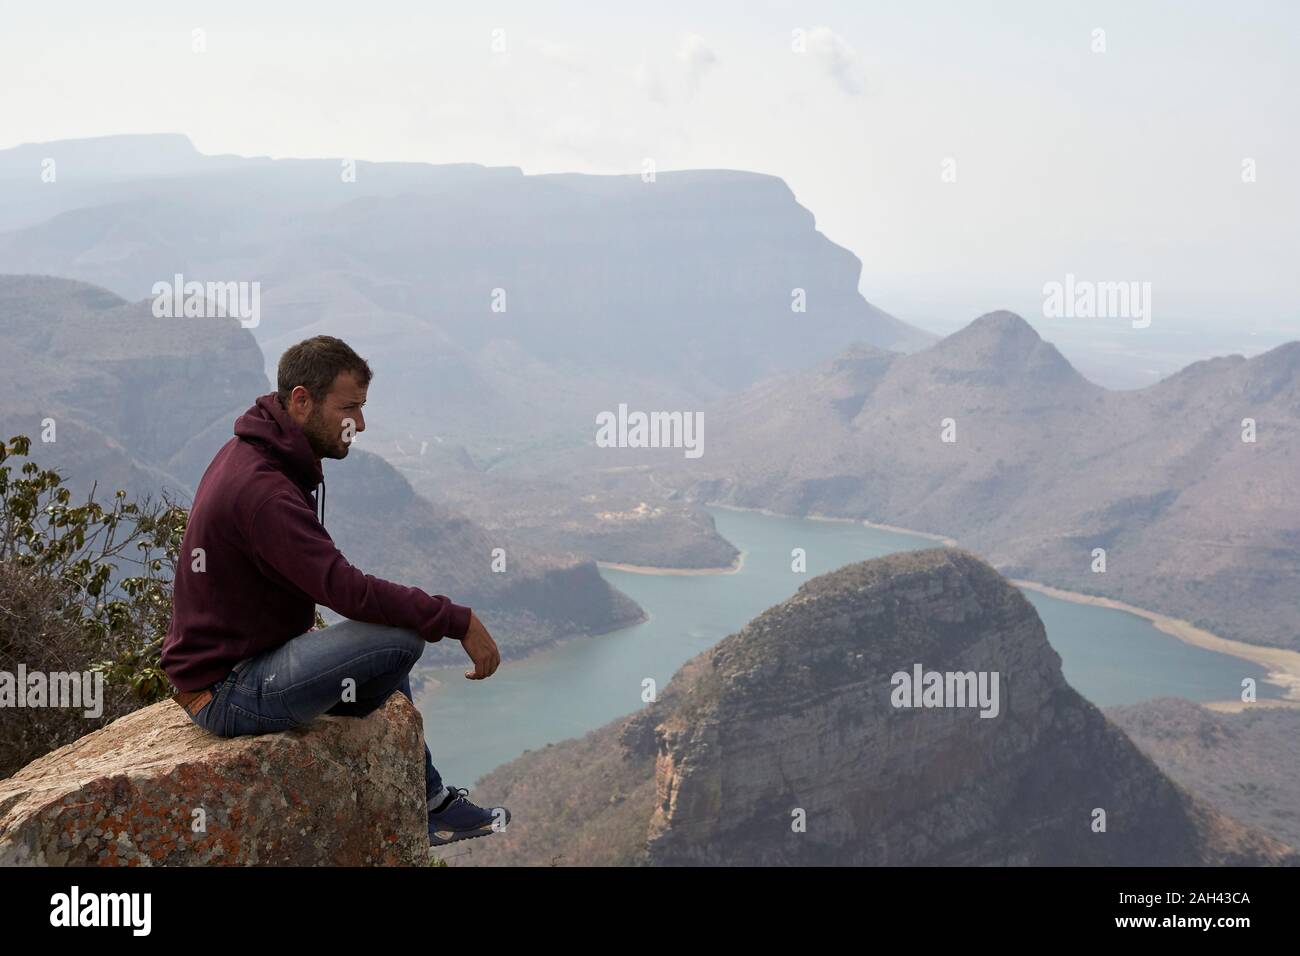 Man sitting on a rock with beautiful landscape as background, Blyde River Canyon, South Africa Stock Photo